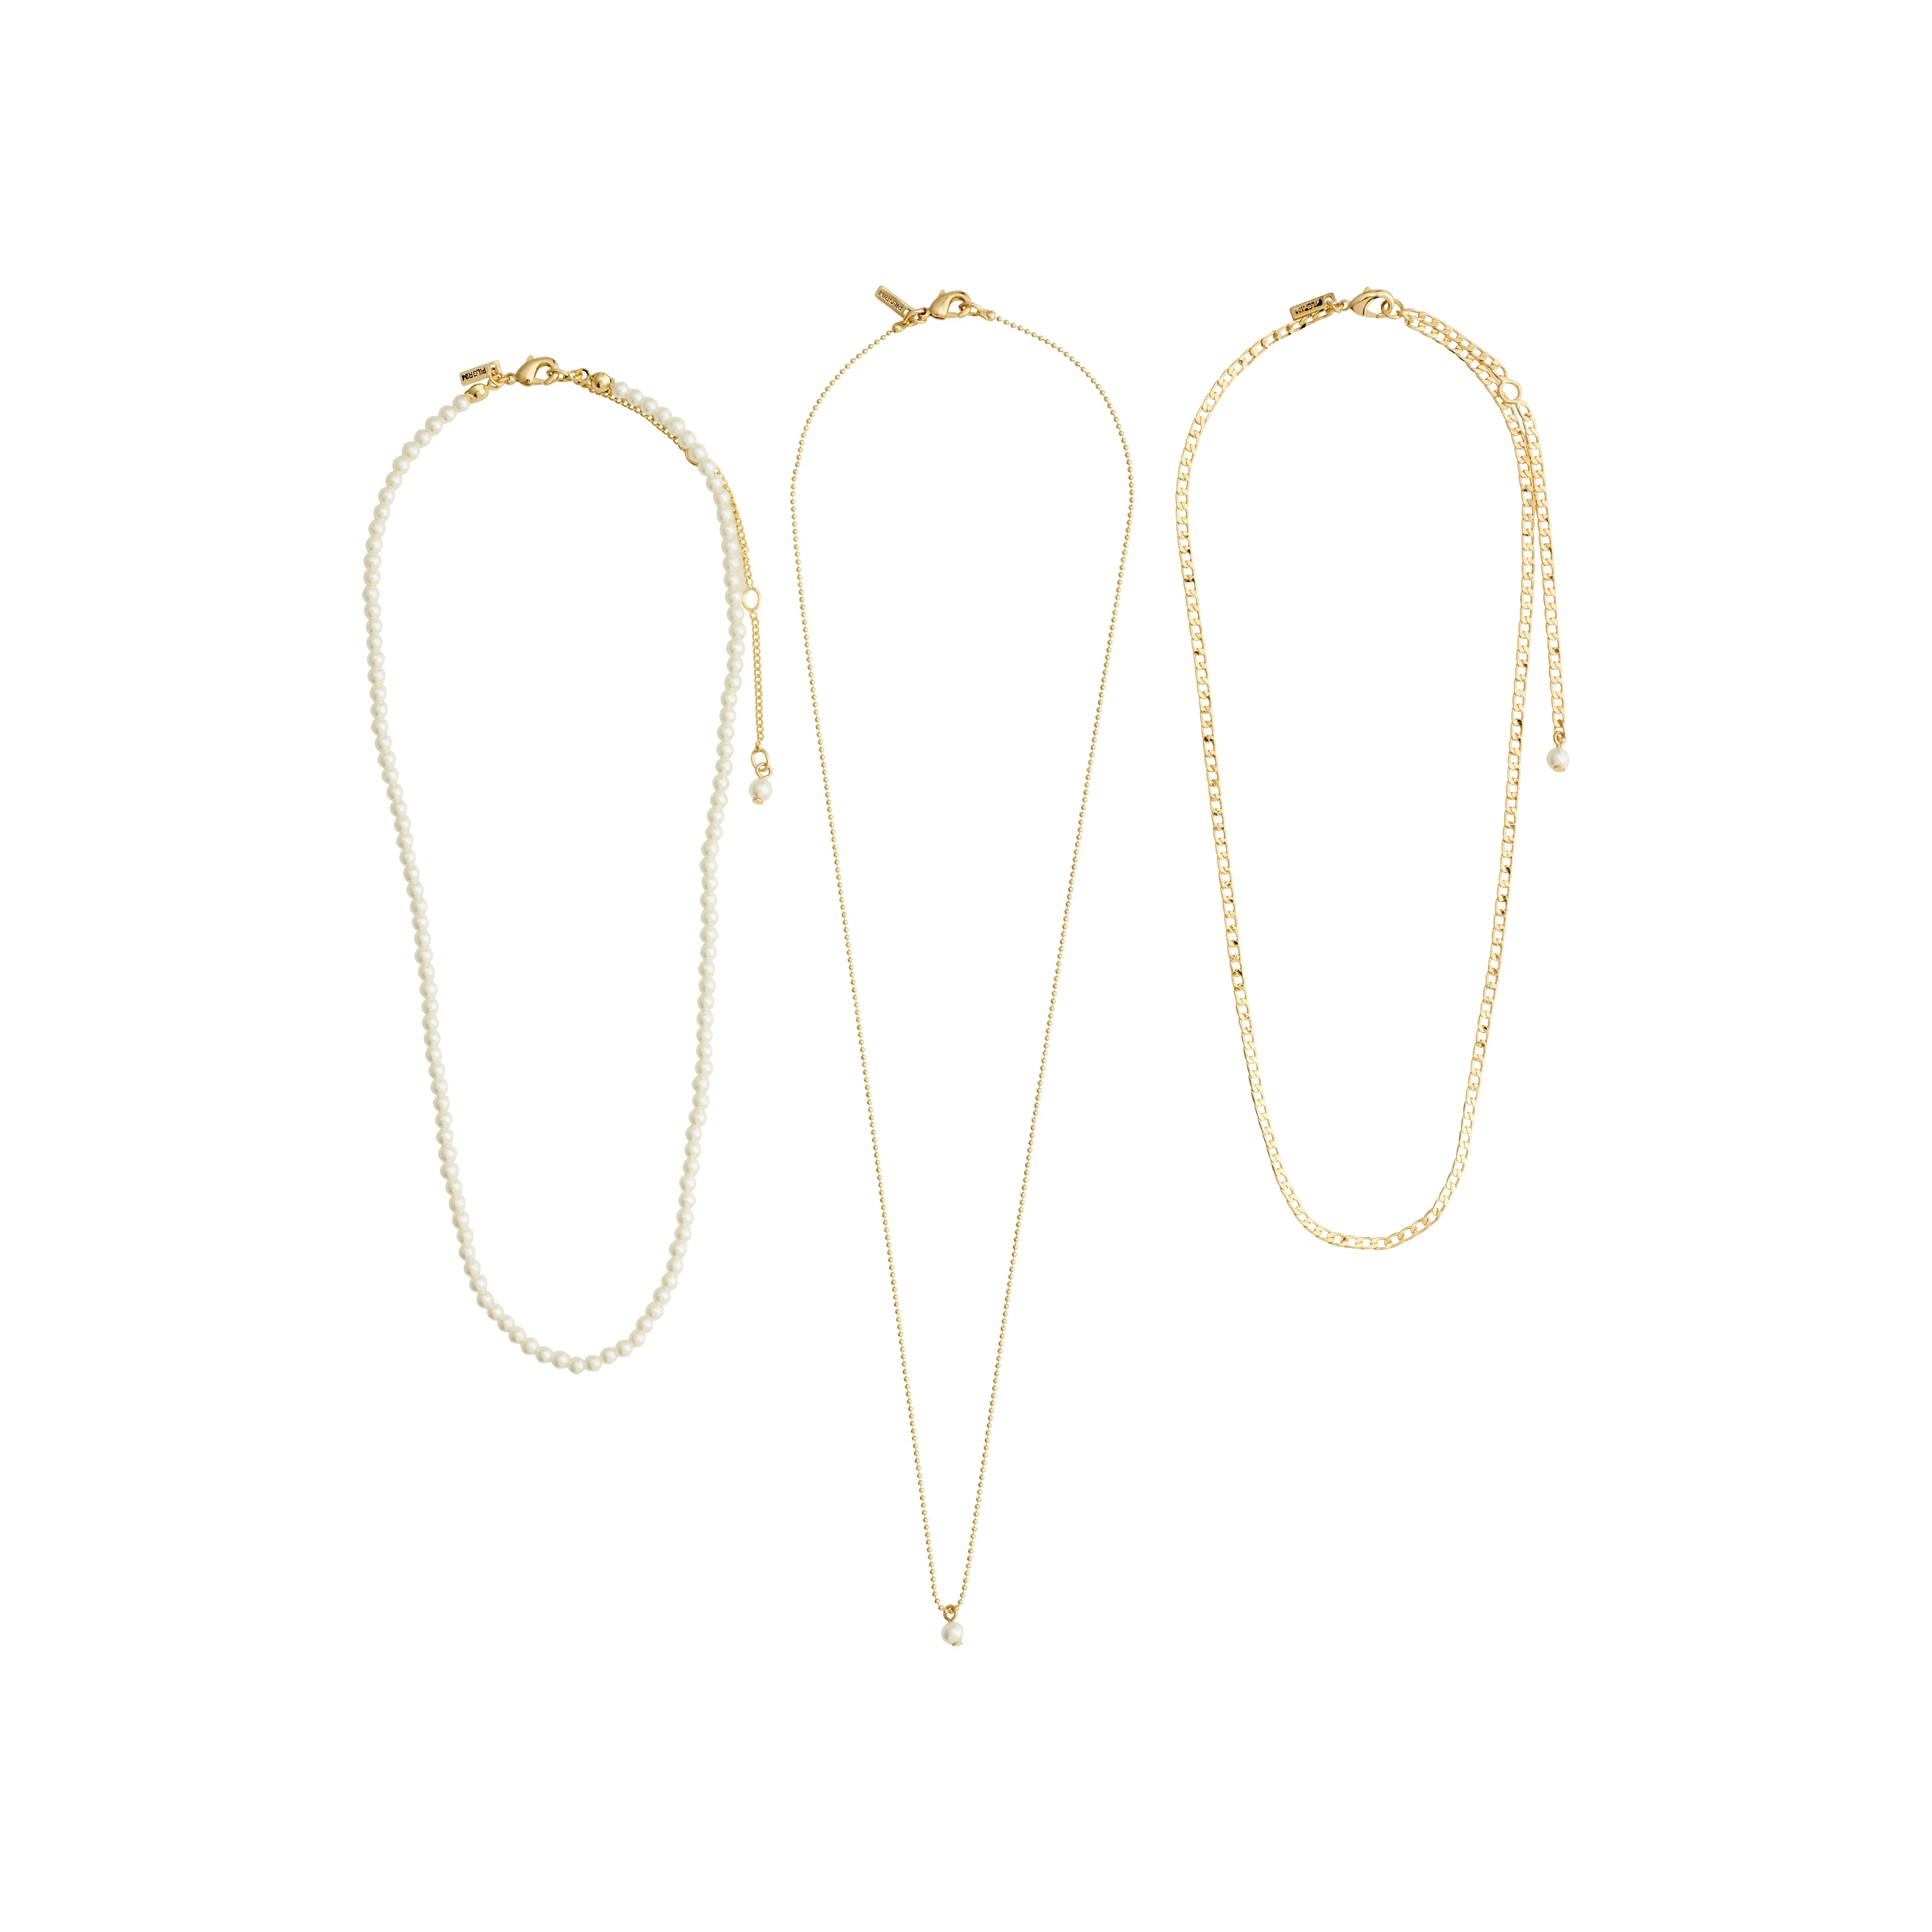 Baker Necklace 3-in-1 - Gold Plated